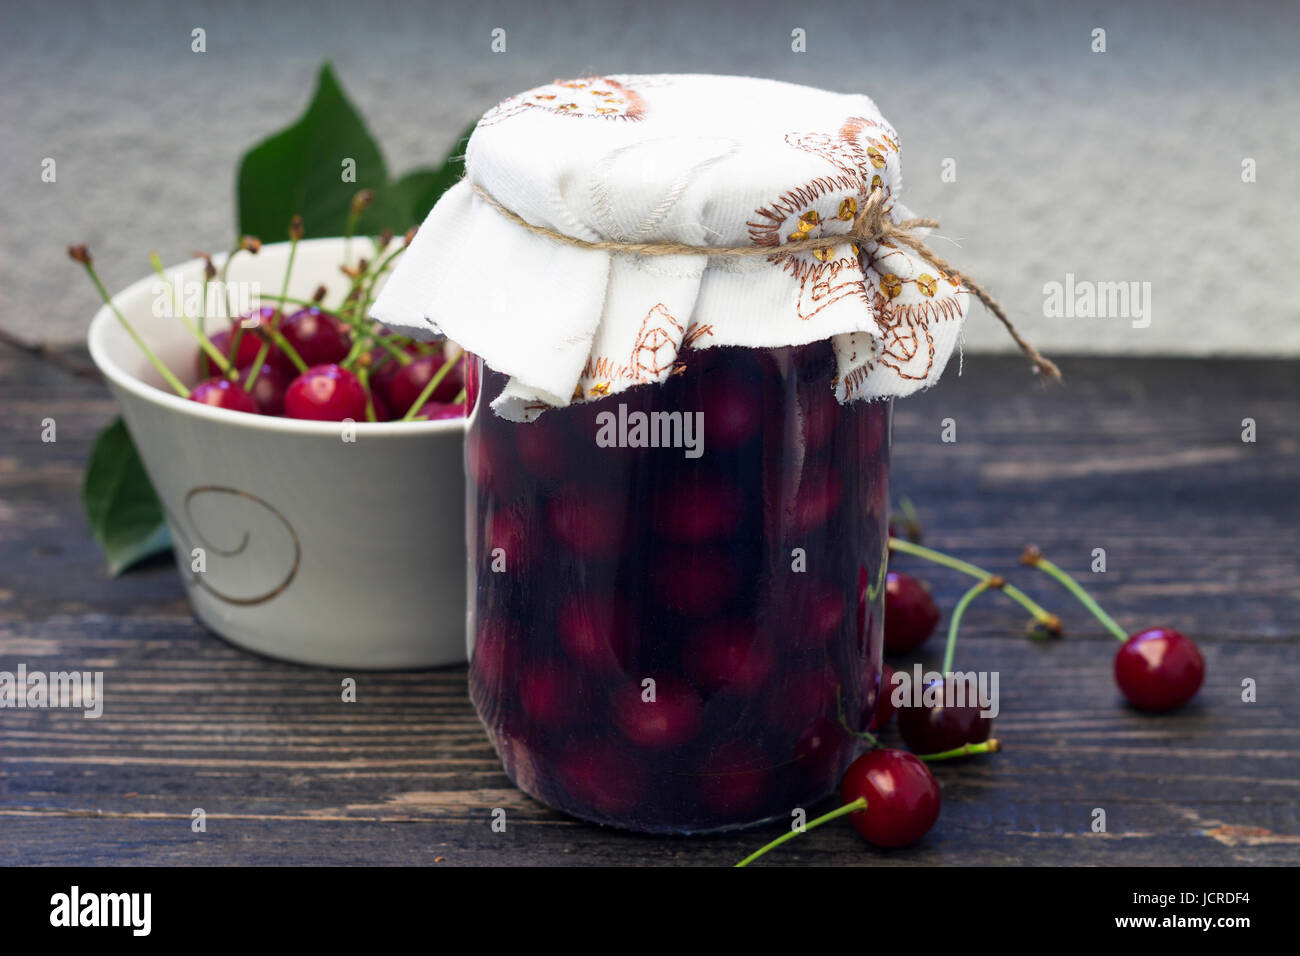 Jar with sour cherry compote on the wooden table Stock Photo